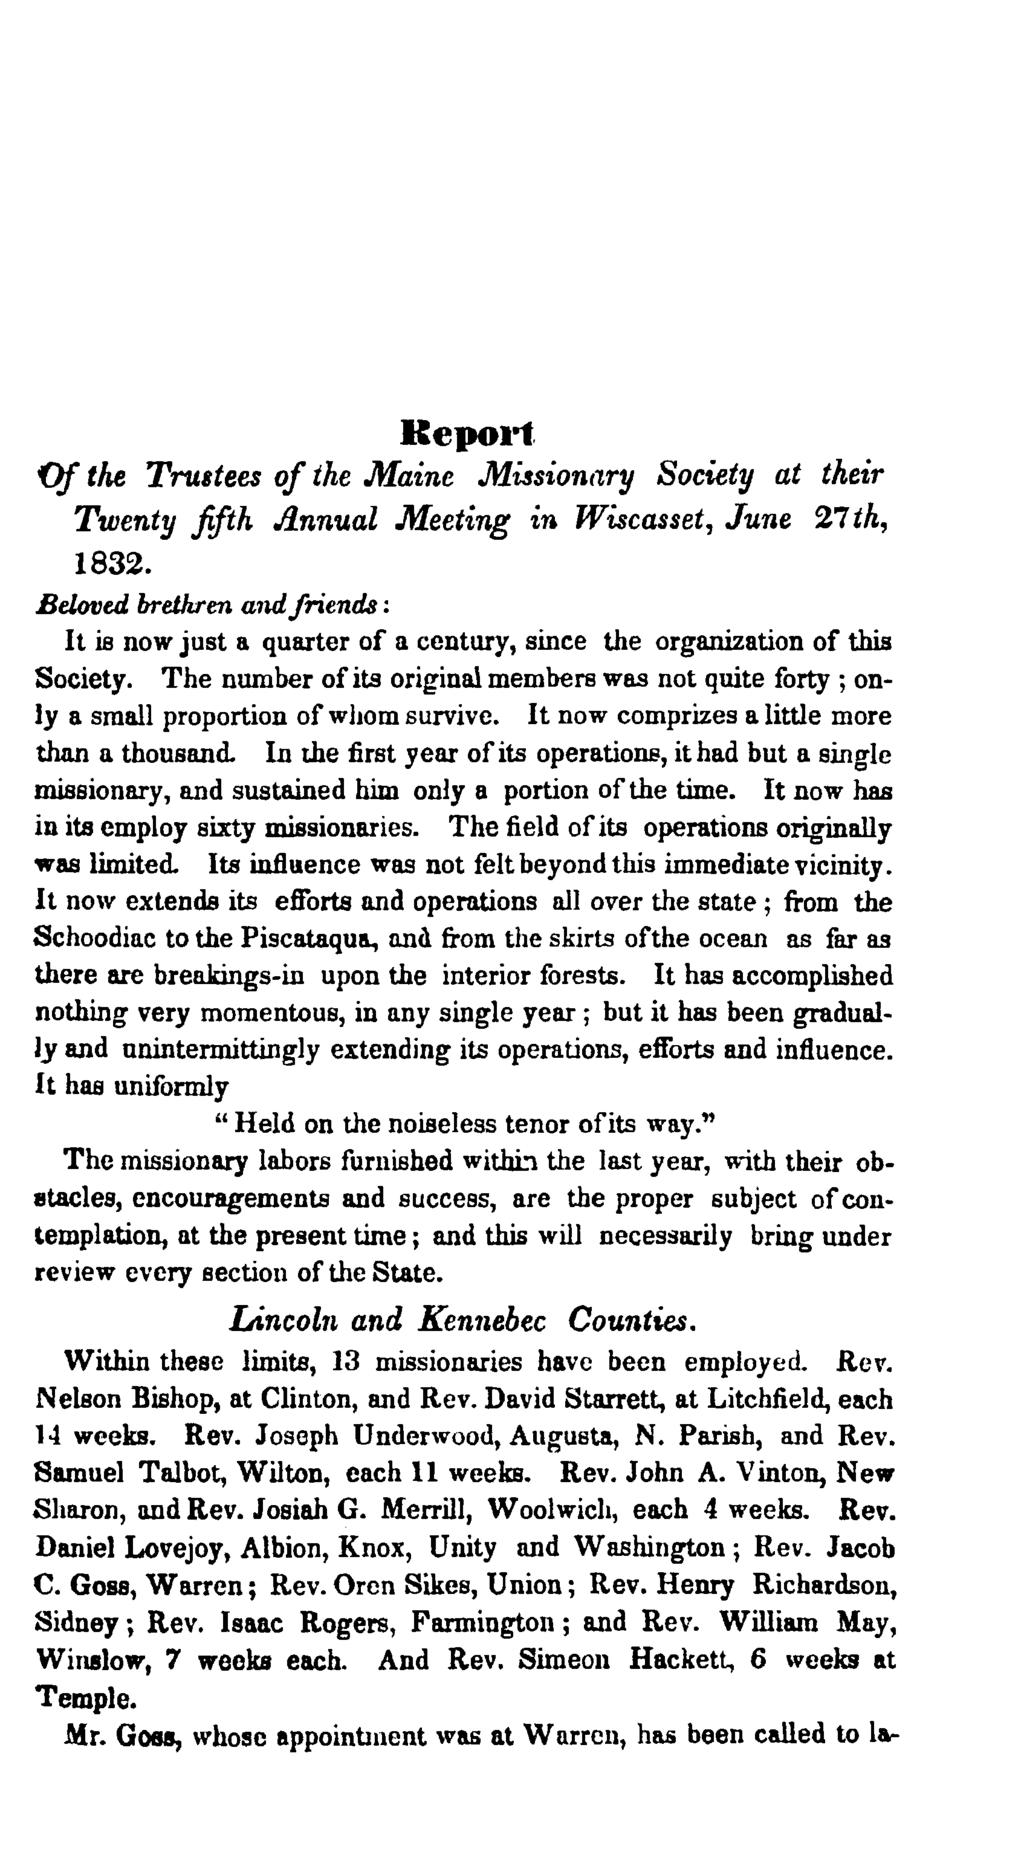 Repol-t, Of the Tru8tees of the Maine Missionary Society at their Twenty fifth ilnnual Meeting in Wiscasset, June 27 th, 1832.